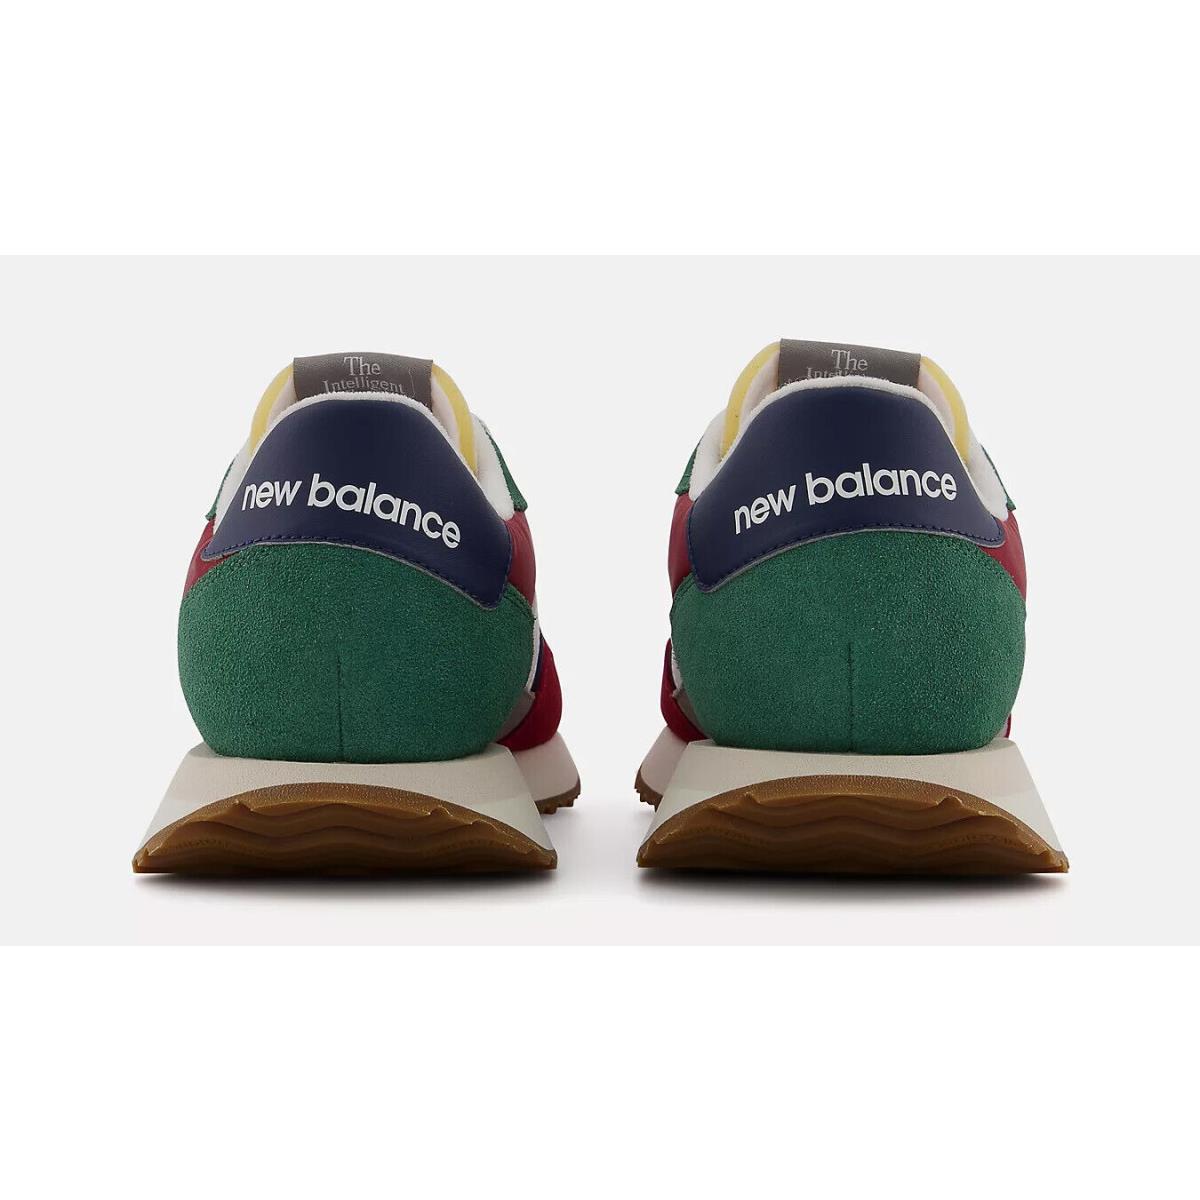 New Balance shoes  - Red/Green/Navy Blue 8